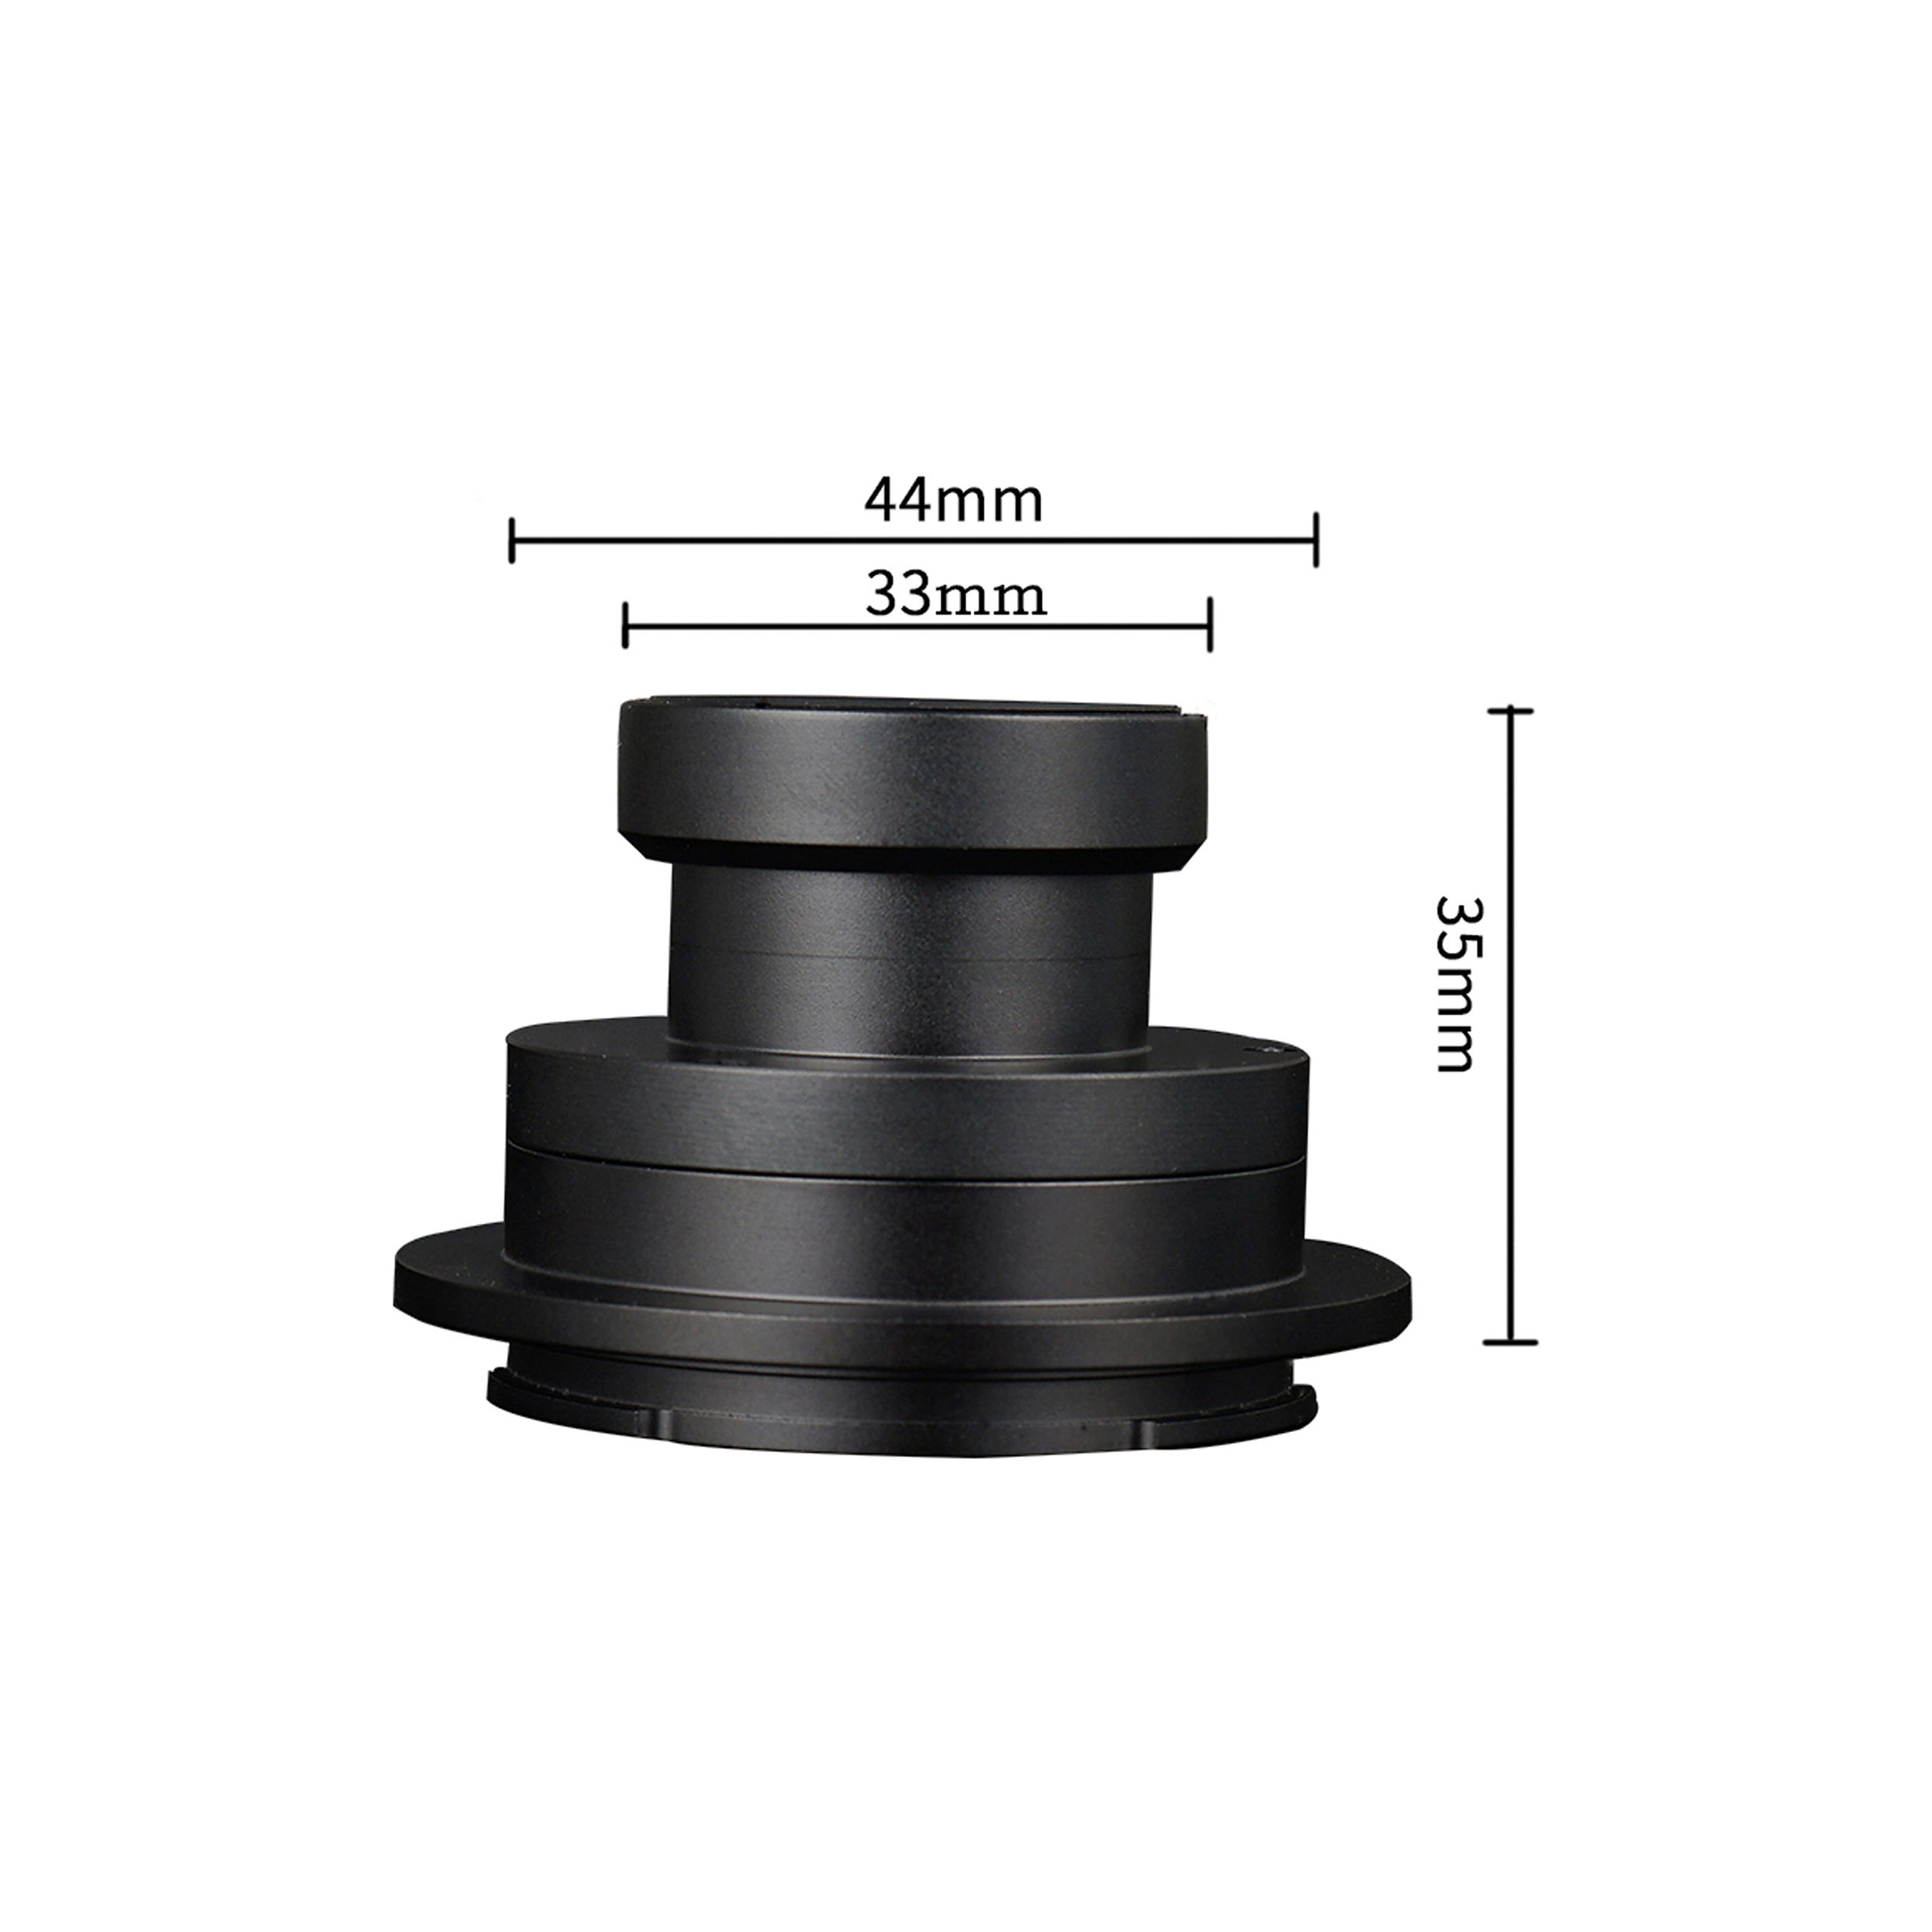 7artisans Photoelectric 50mm f/5.6 Half-Frame Lens for Drone Photography for Sony E-Mount